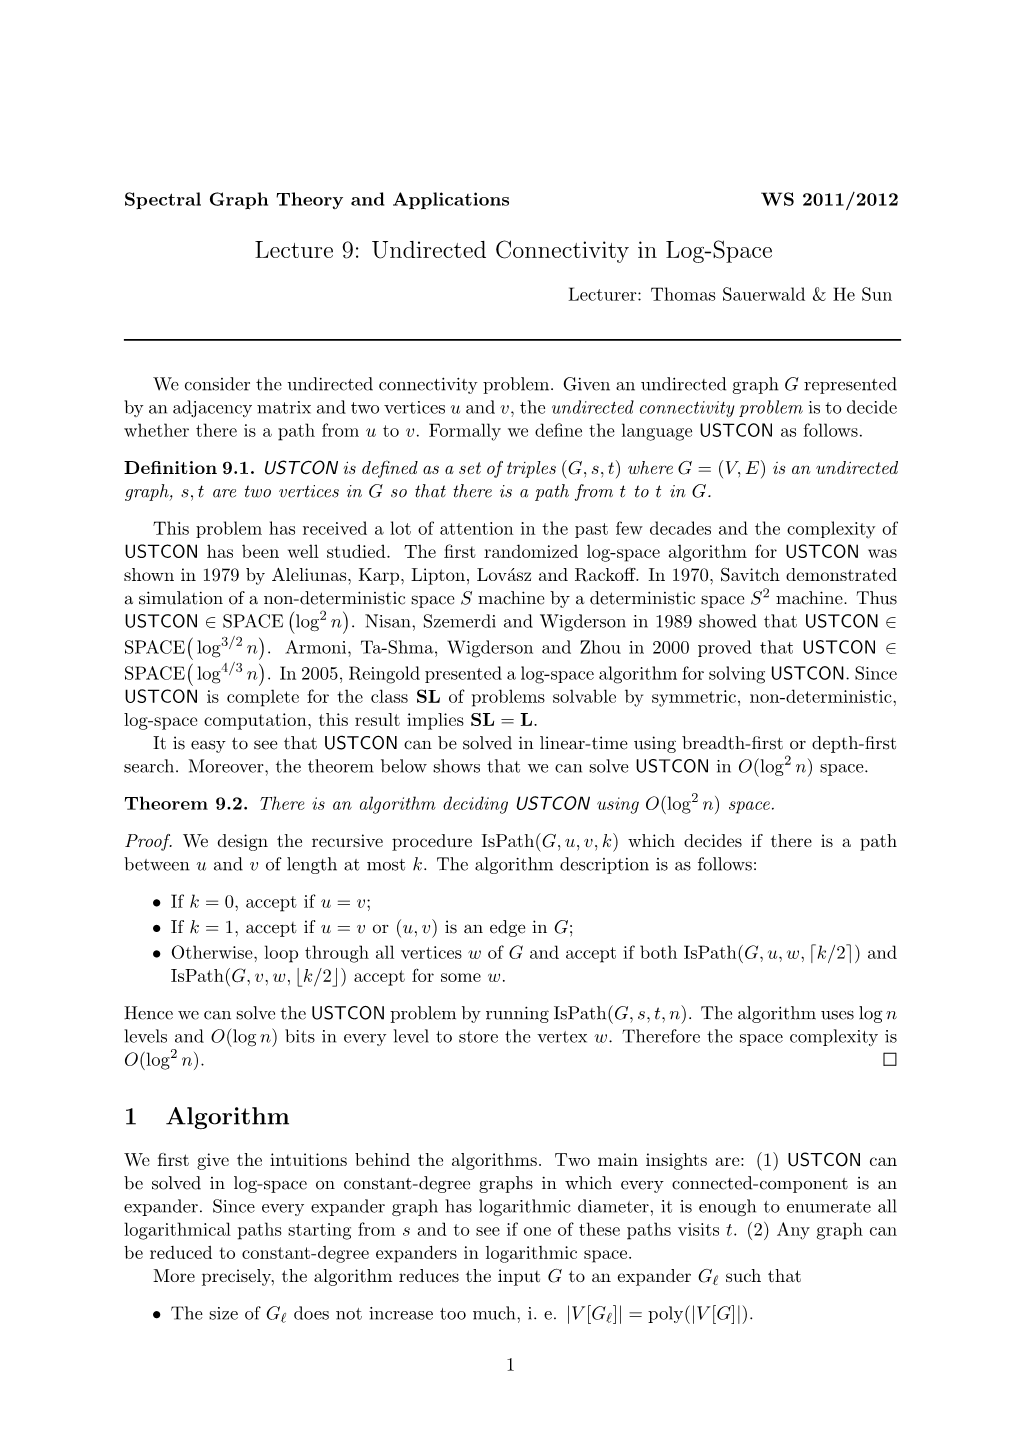 Lecture 9: Undirected Connectivity in Log-Space 1 Algorithm